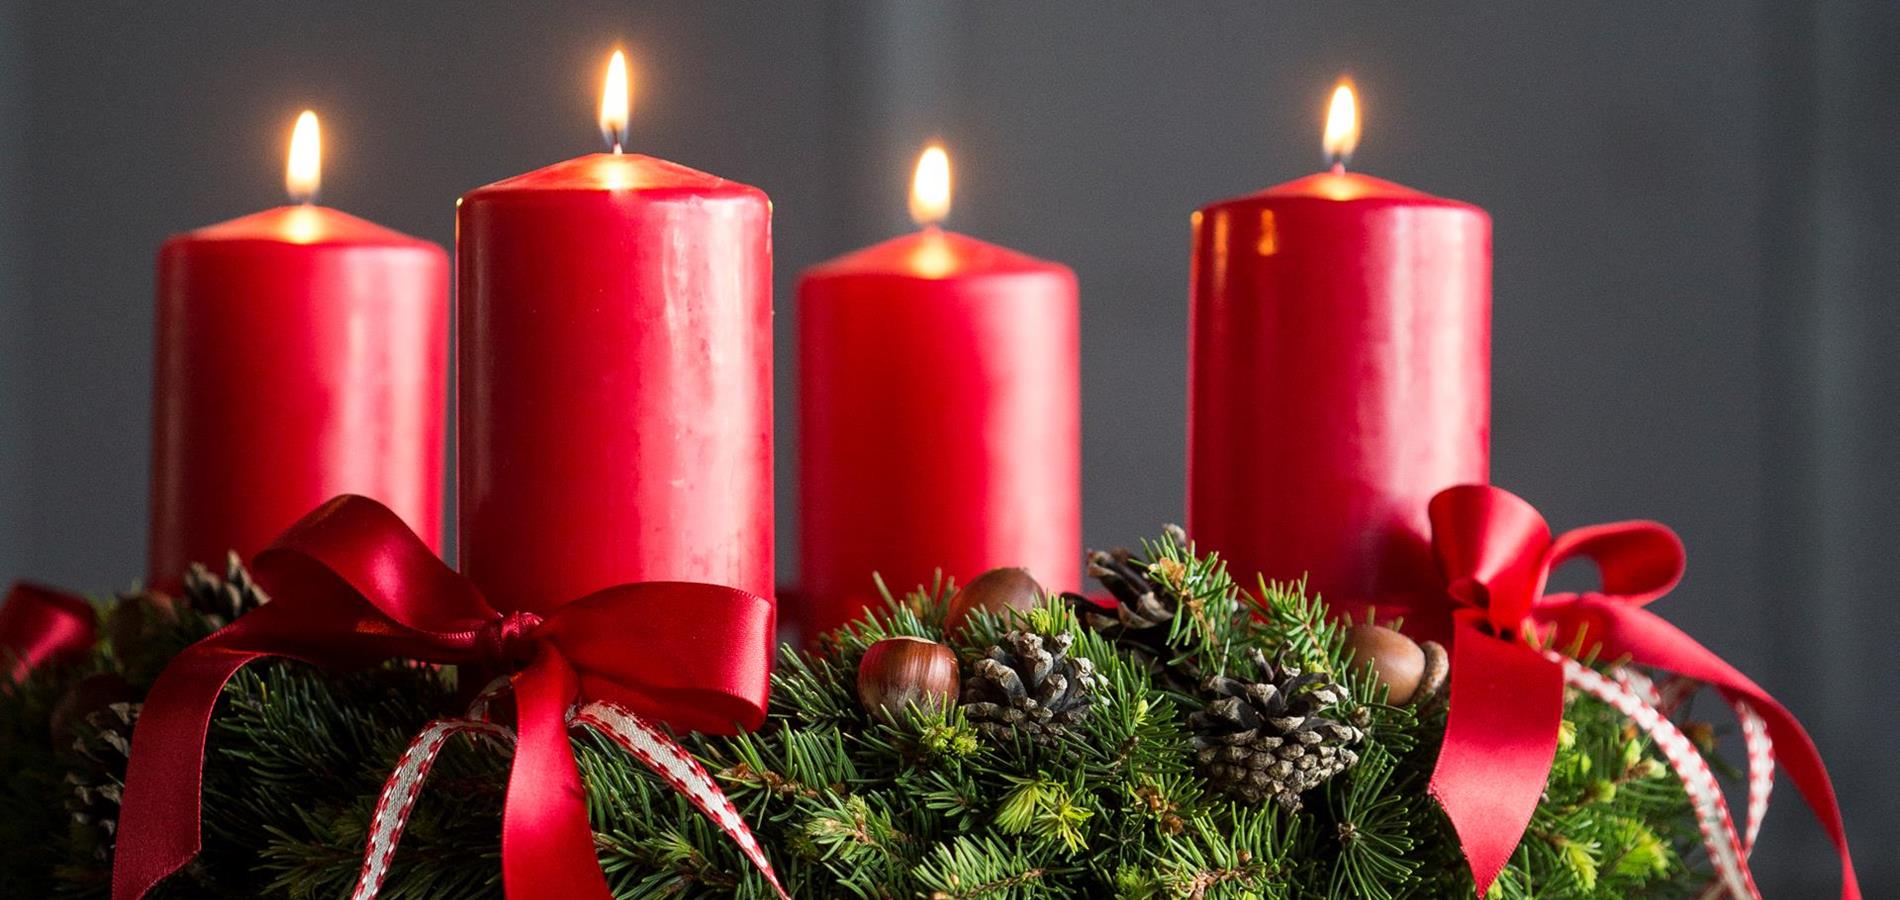 The countdown to Christmas with the Advent wreath